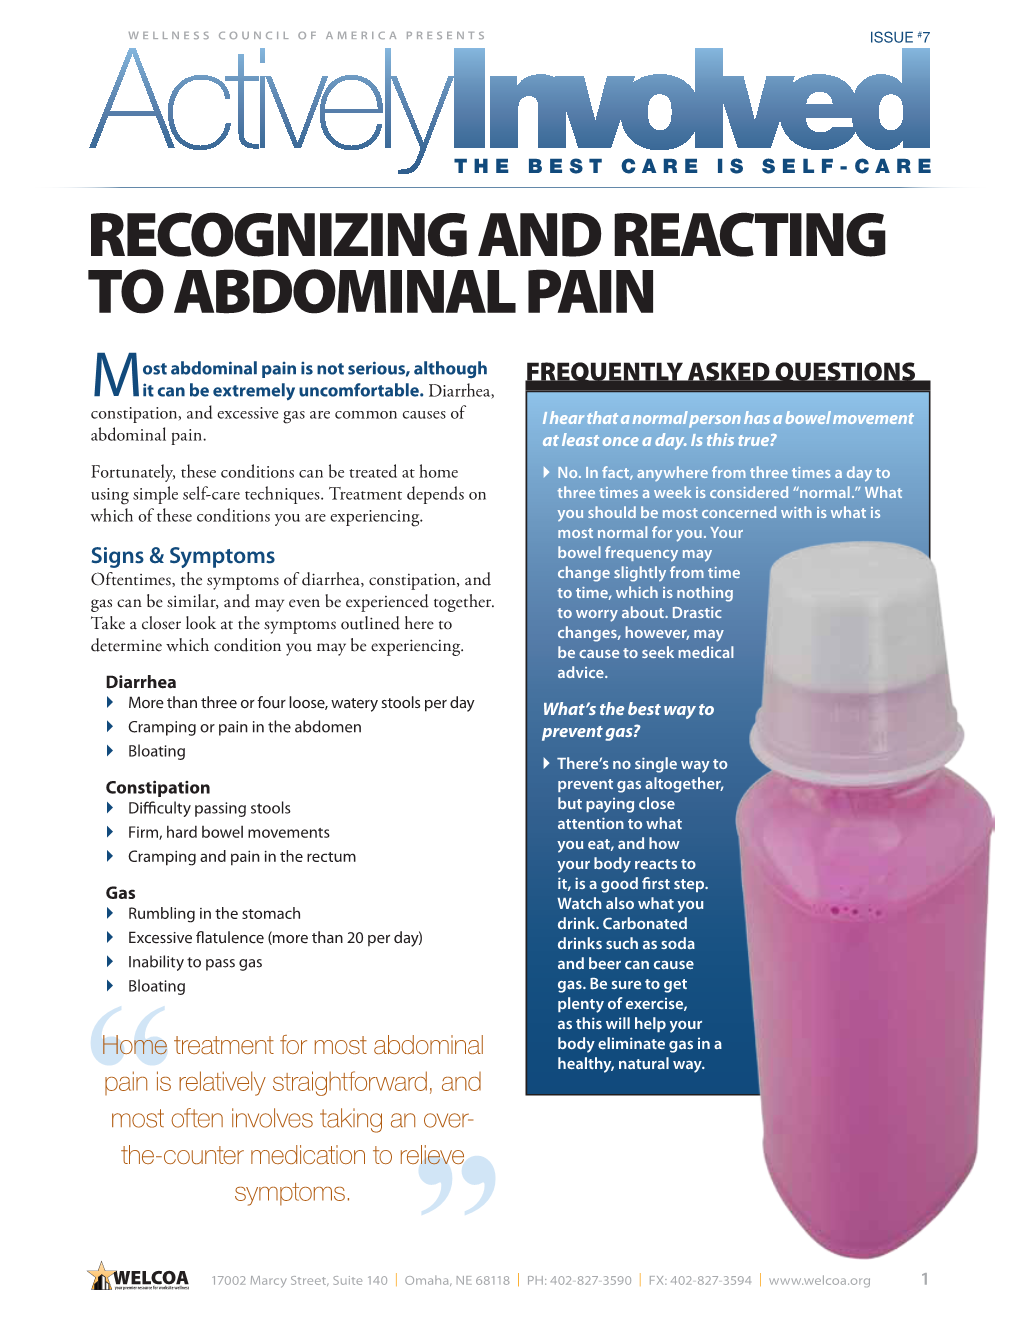 Recognizing and Reacting to Abdominal Pain